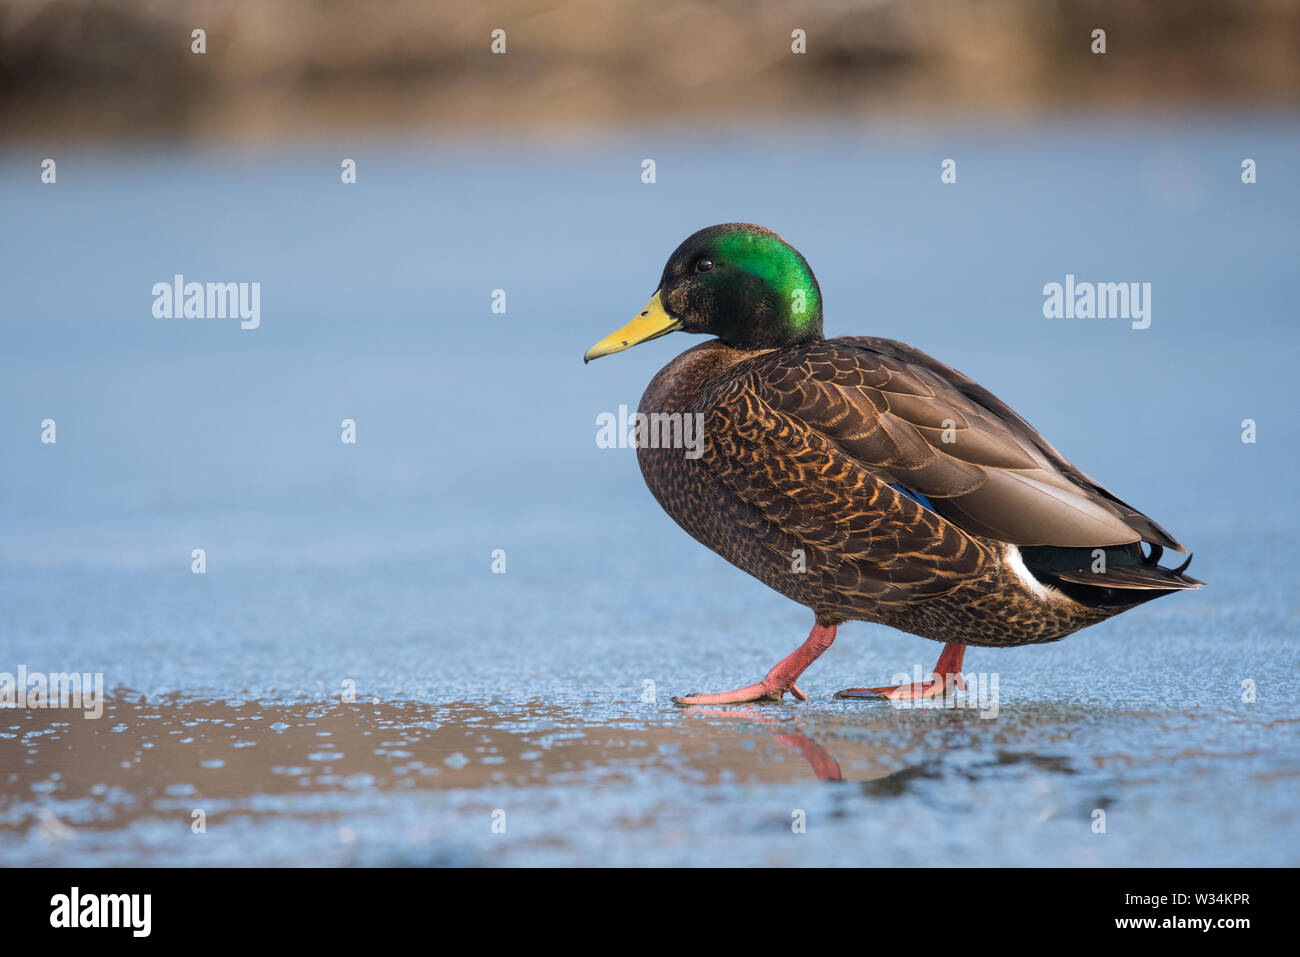 An American Black Duck x Mallard hybrid wades in the not-yet-frozen water at Humber Bay in Toronto, Ontario. Stock Photo